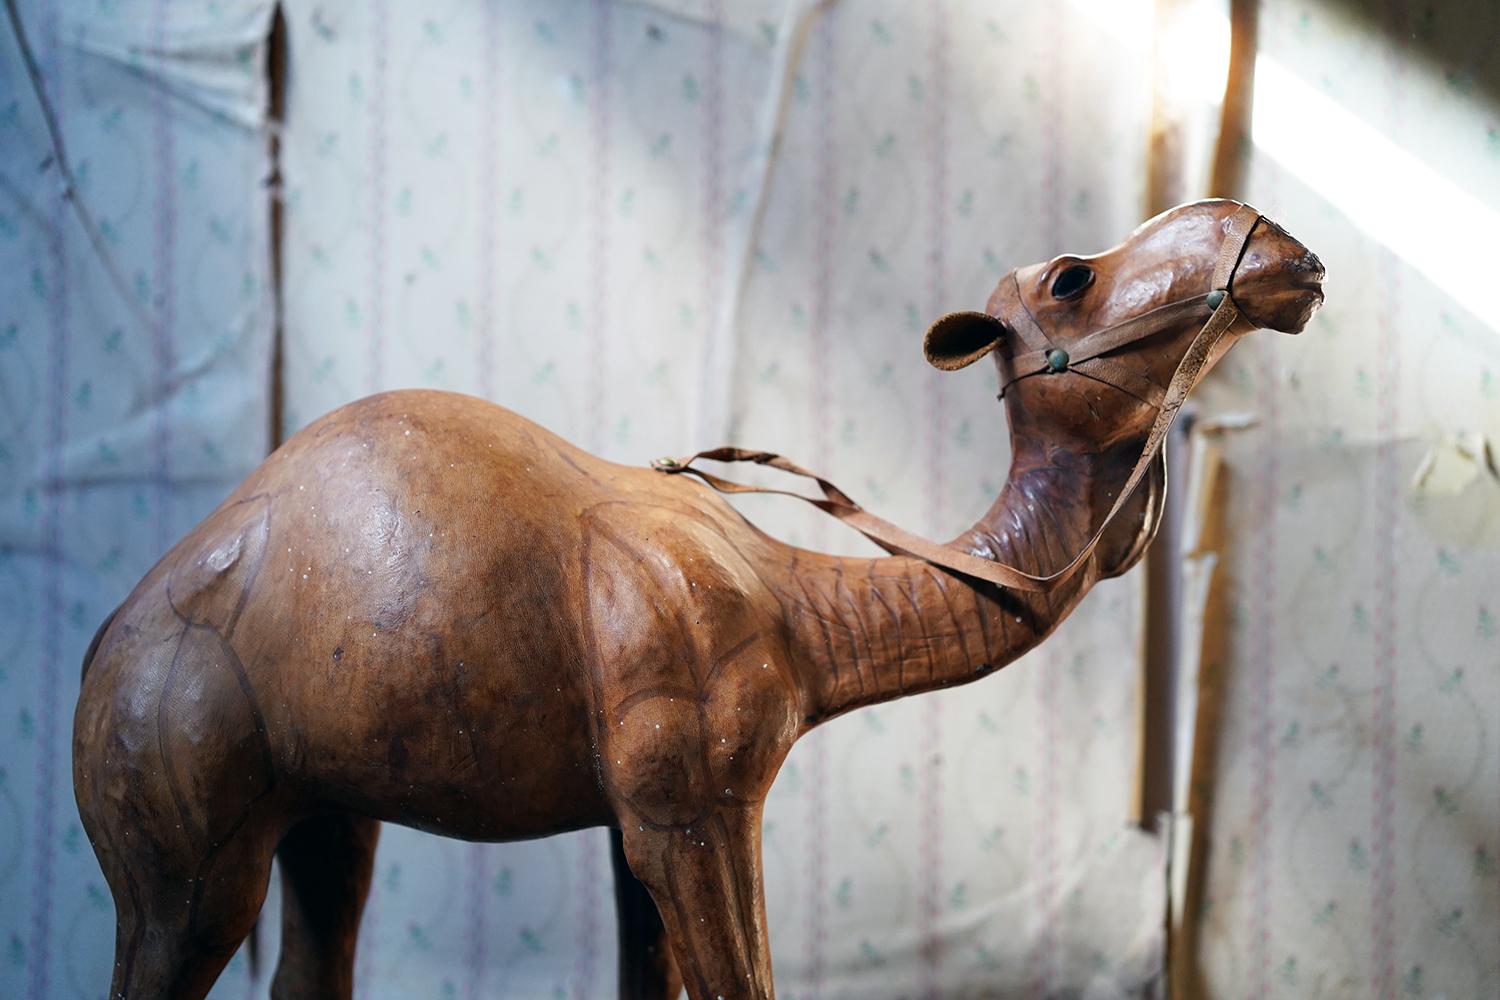 The decorative natural tanned leather model of a camel with harness, realistically modelled and handstitched in the style of earlier Liberty pieces, having dark glass eyes and a nice patina, the whole surviving from the latter half of the twentieth